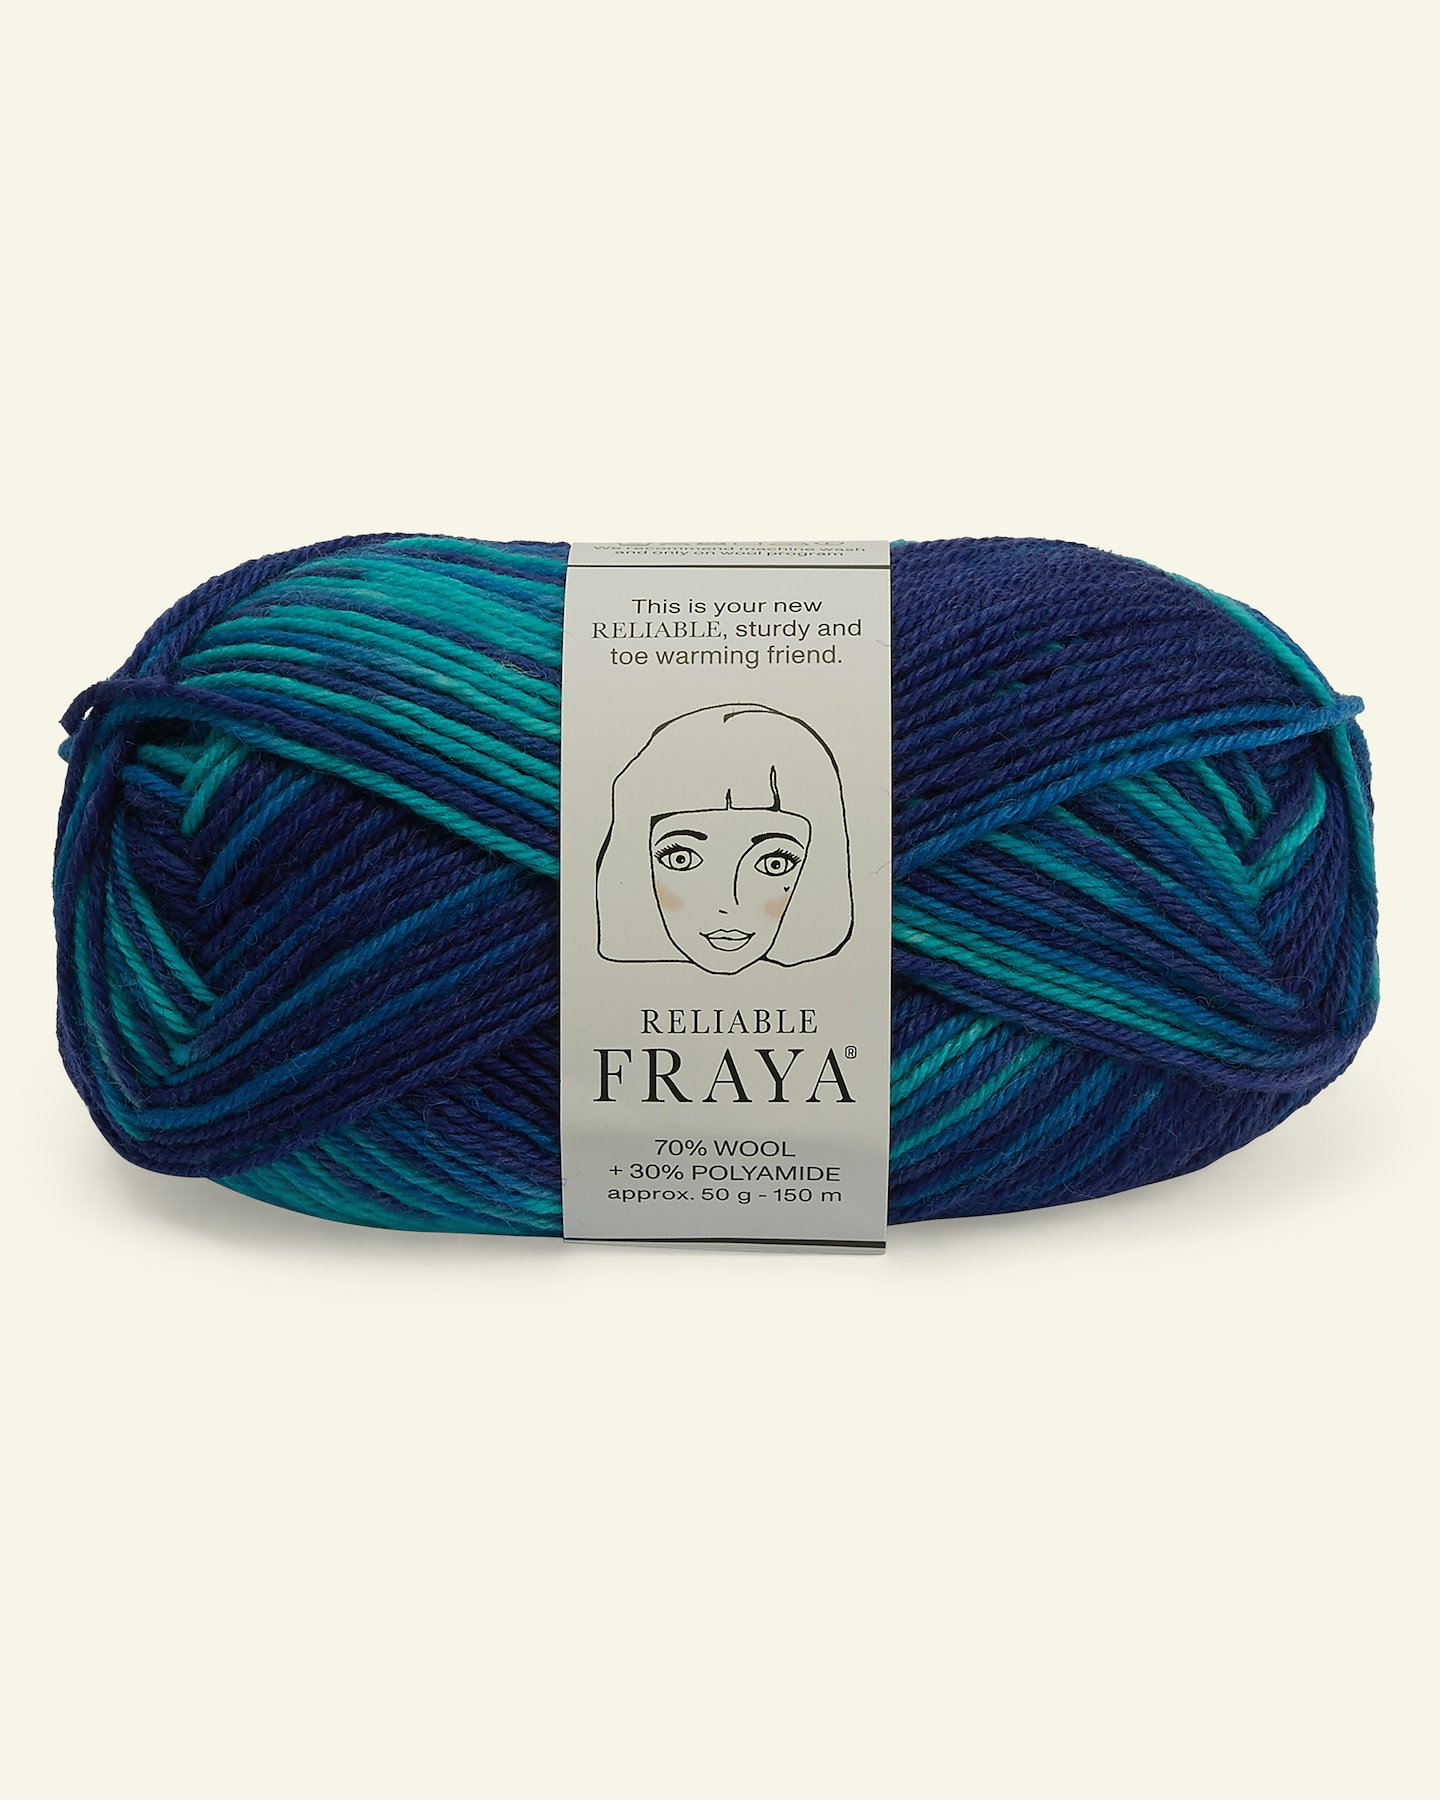 FRAYA, wool yarn "Reliable", blue/turquoise mix col.  90001196_pack